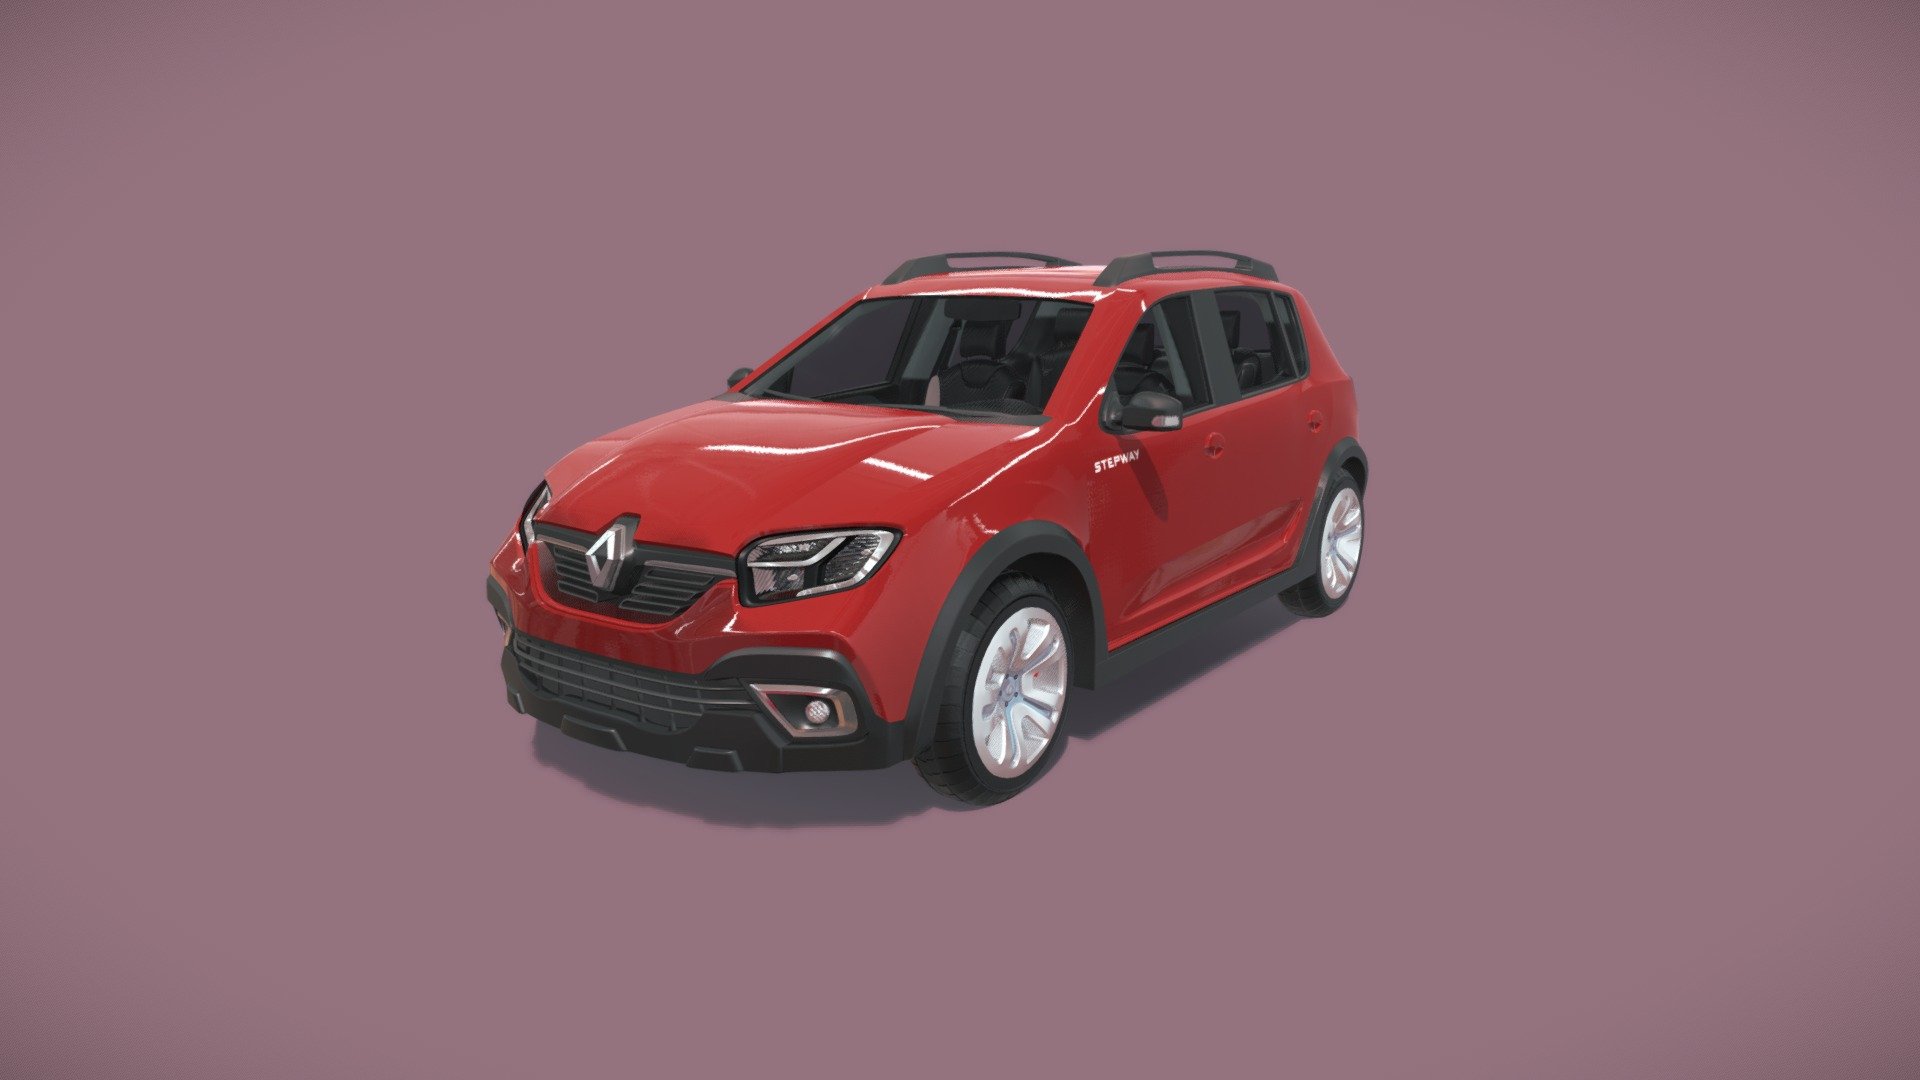 Model car renault sandero stepway, high poly. Model made in blender, textures made in substance painter. texture quality lowered for optimization 3d model